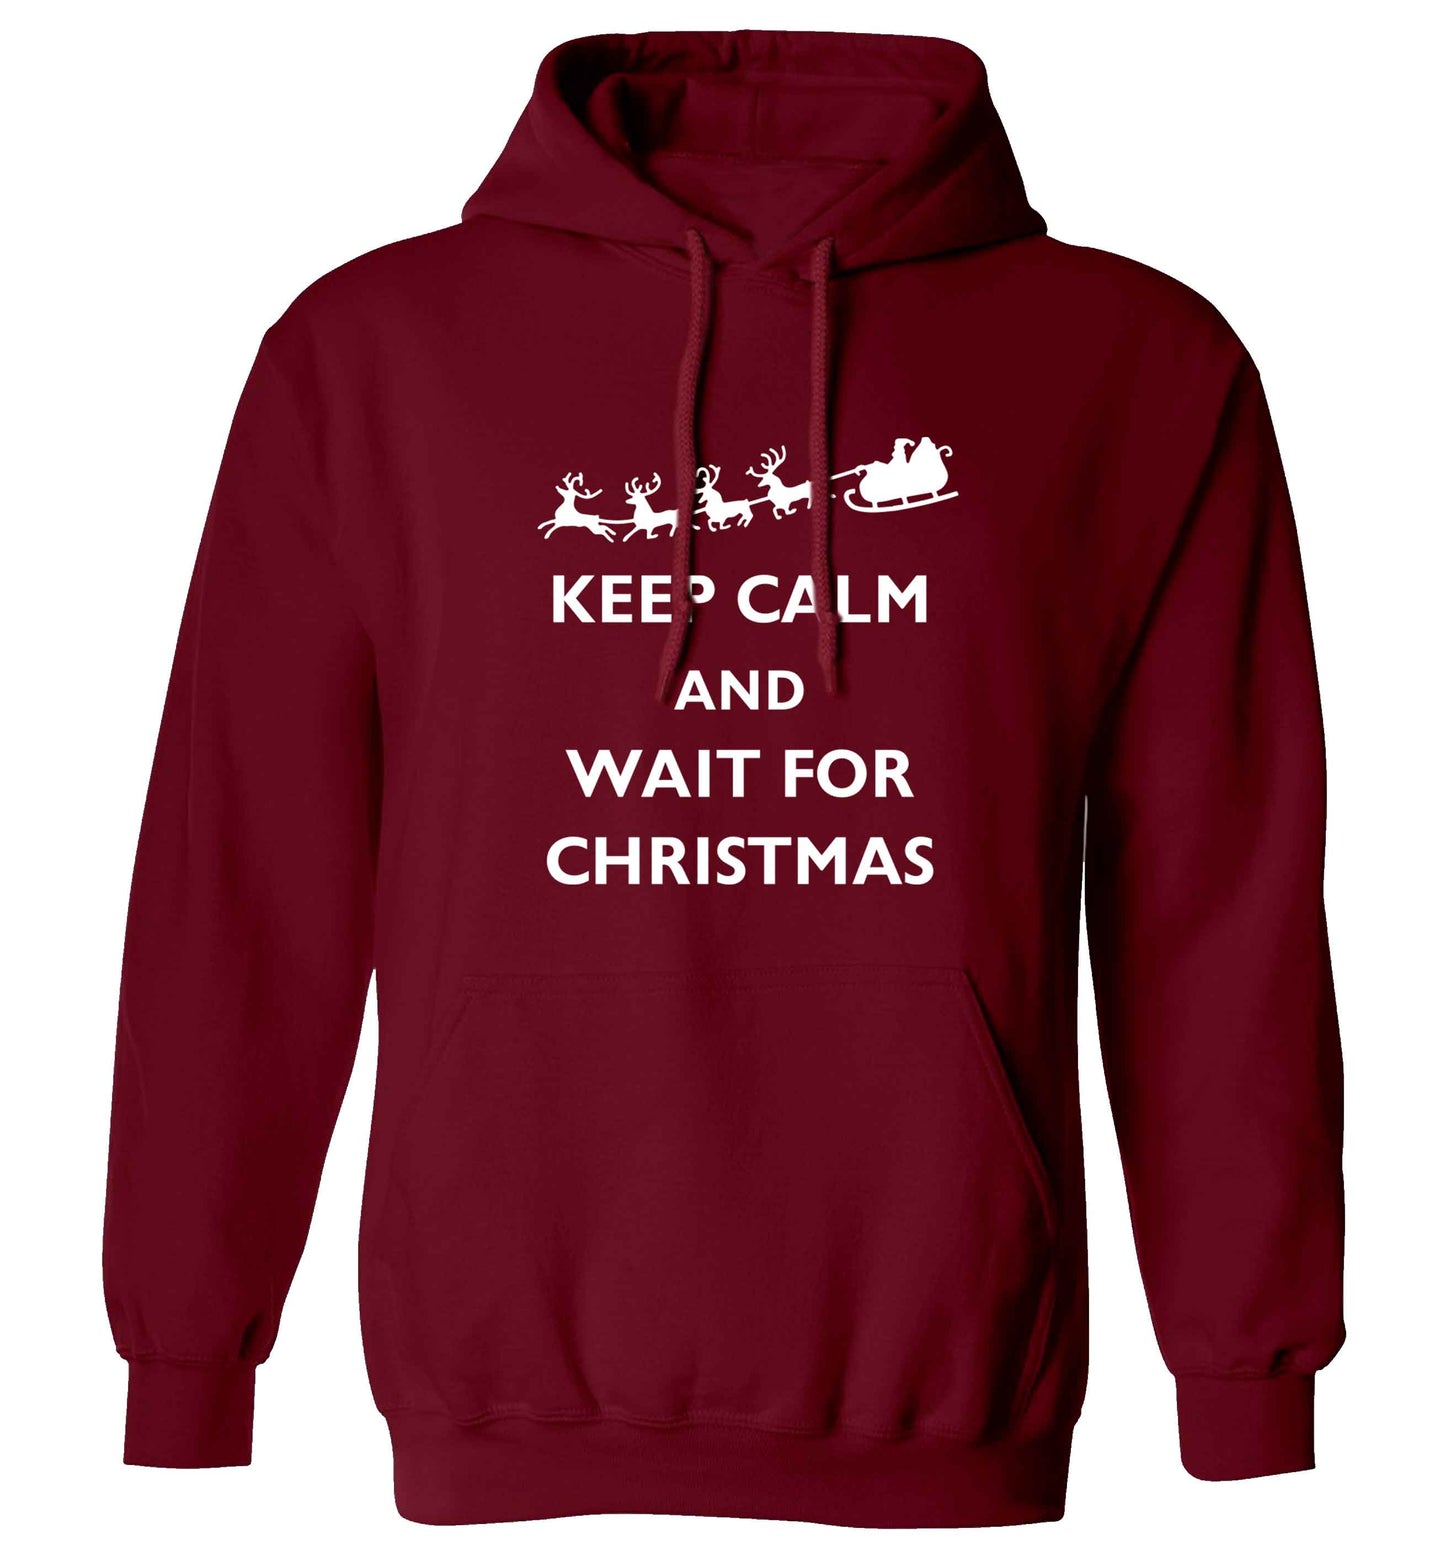 Keep calm and wait for Christmas adults unisex maroon hoodie 2XL